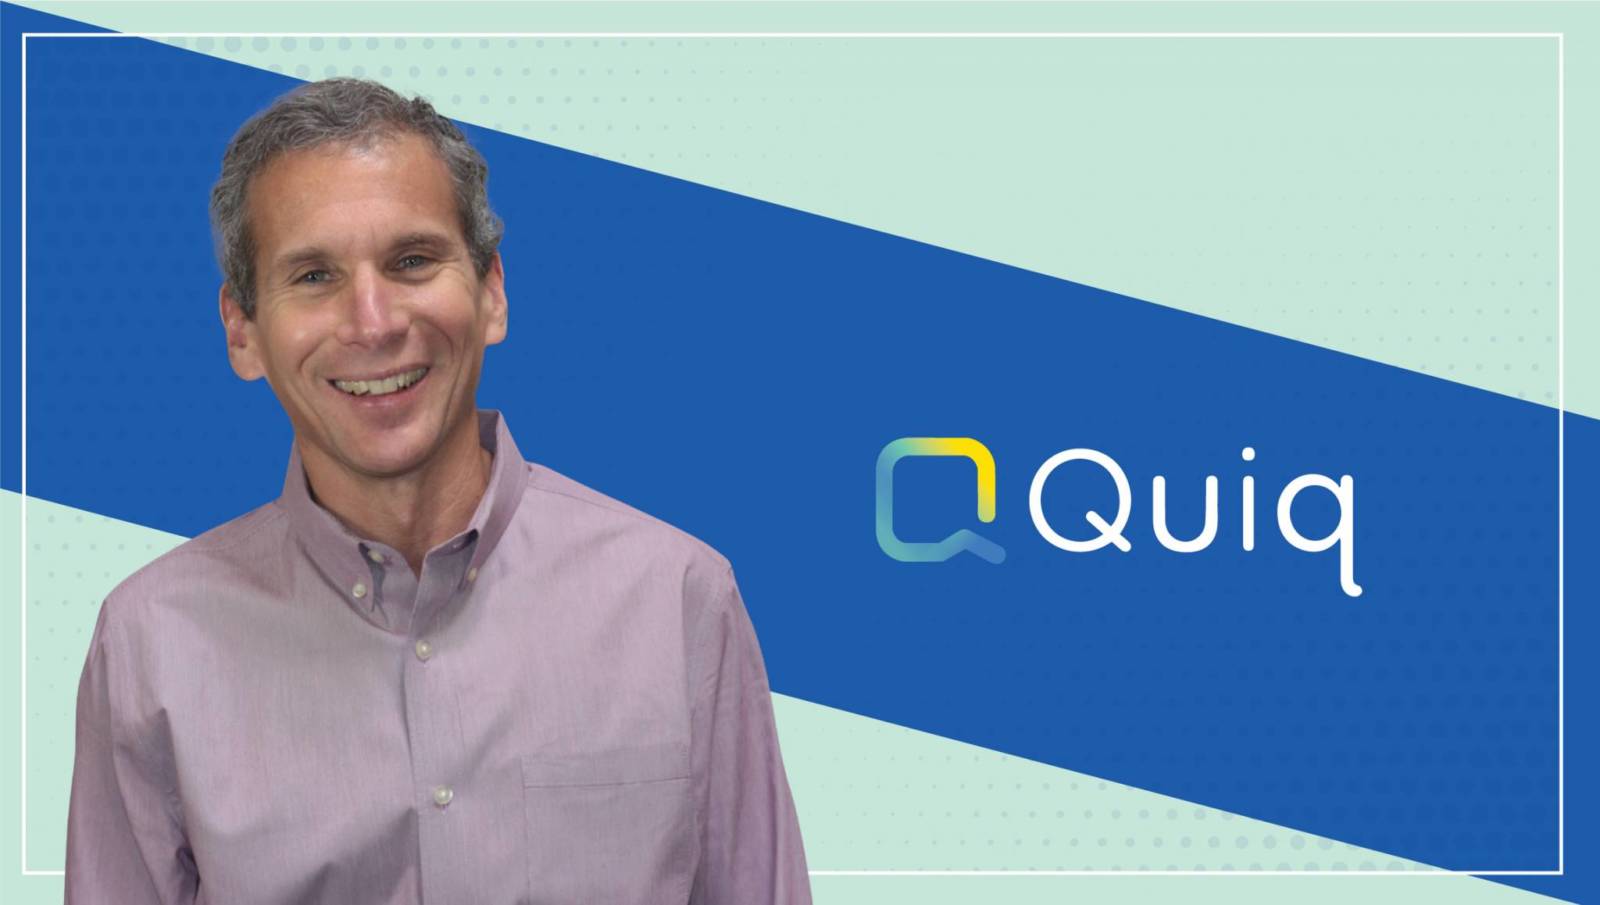 Quiq CEO Mike Myer